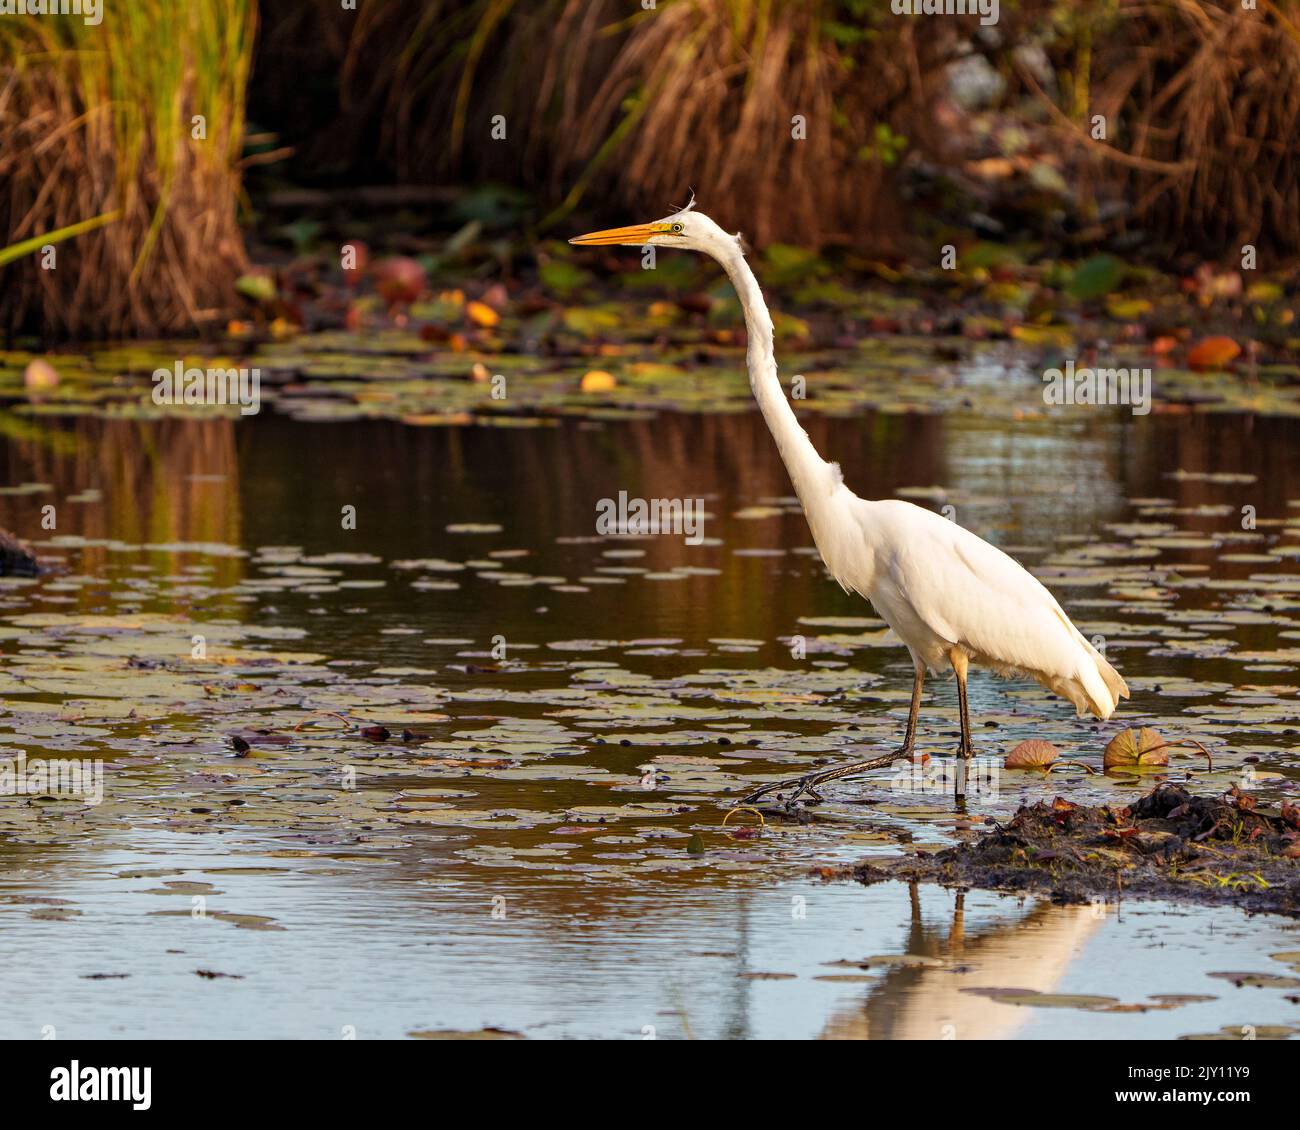 Great White Egret close-up profile side view in shallow water with foliage and water lily pads background in its environment and wetland habitat. Stock Photo